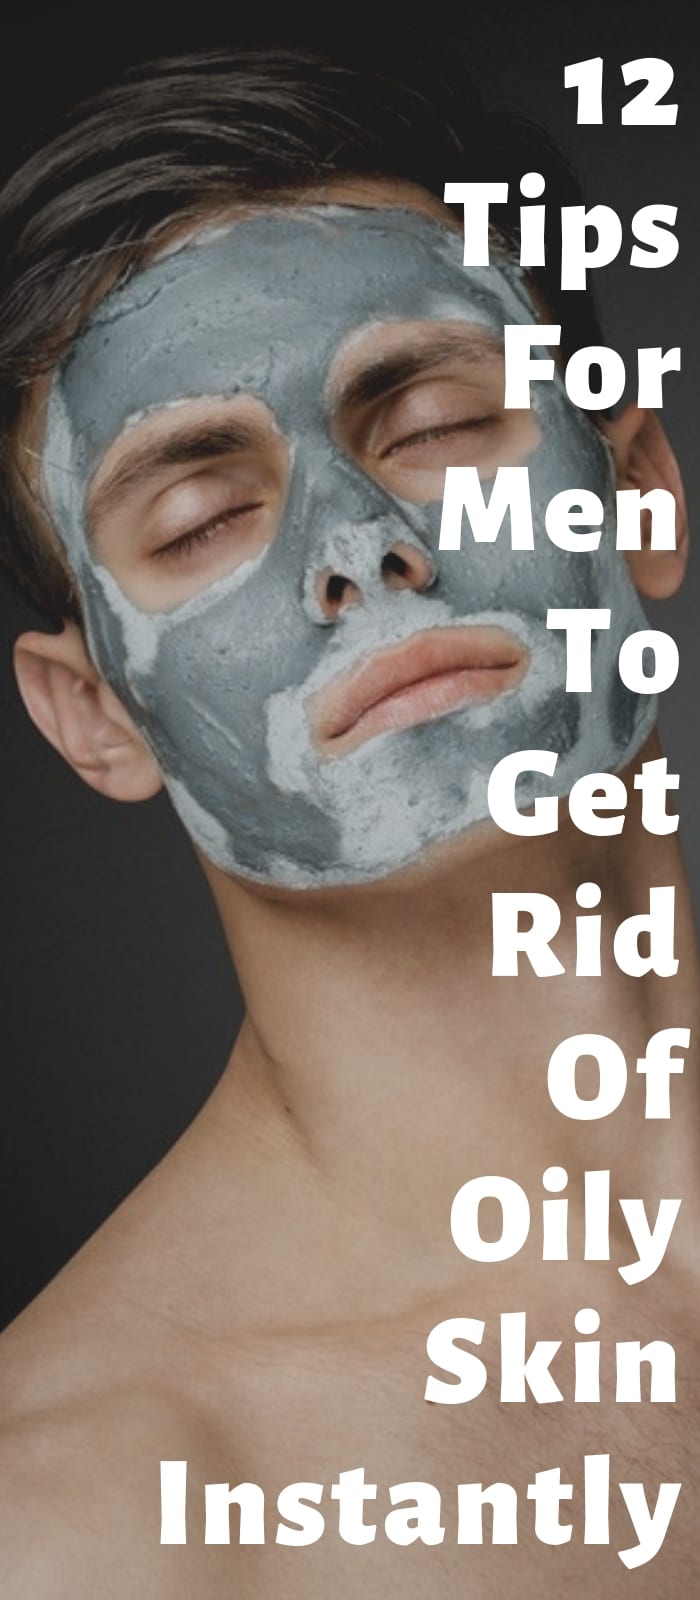 12 Tips For Men To Get Rid Of Oily Skin Instantly